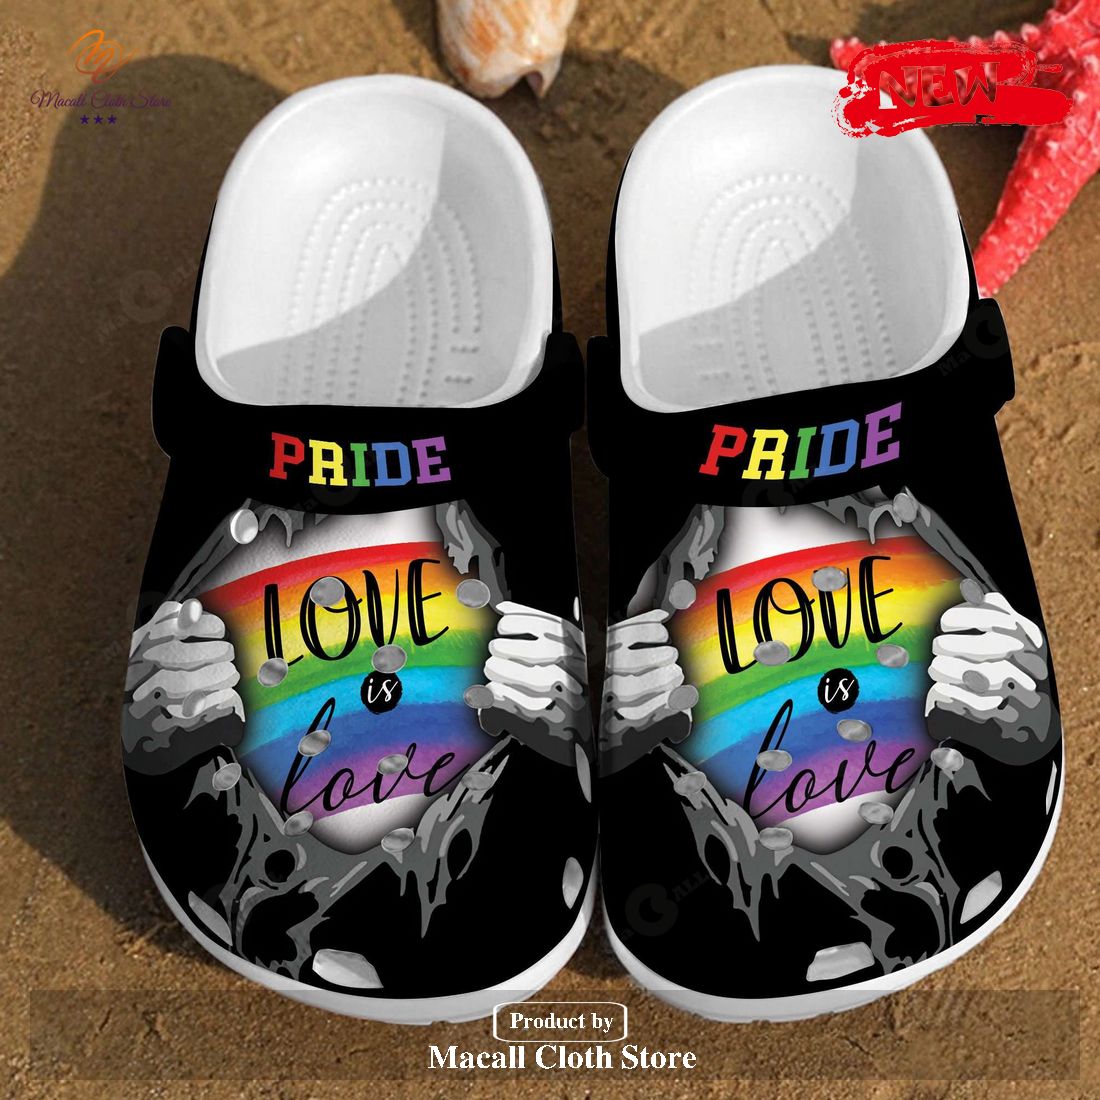 NEW] Lgbt Pride Love Is Rainbow Unisex Birthday Gifts Crocs Clog Shoes -  Macall Cloth Store - Destination for fashionistas